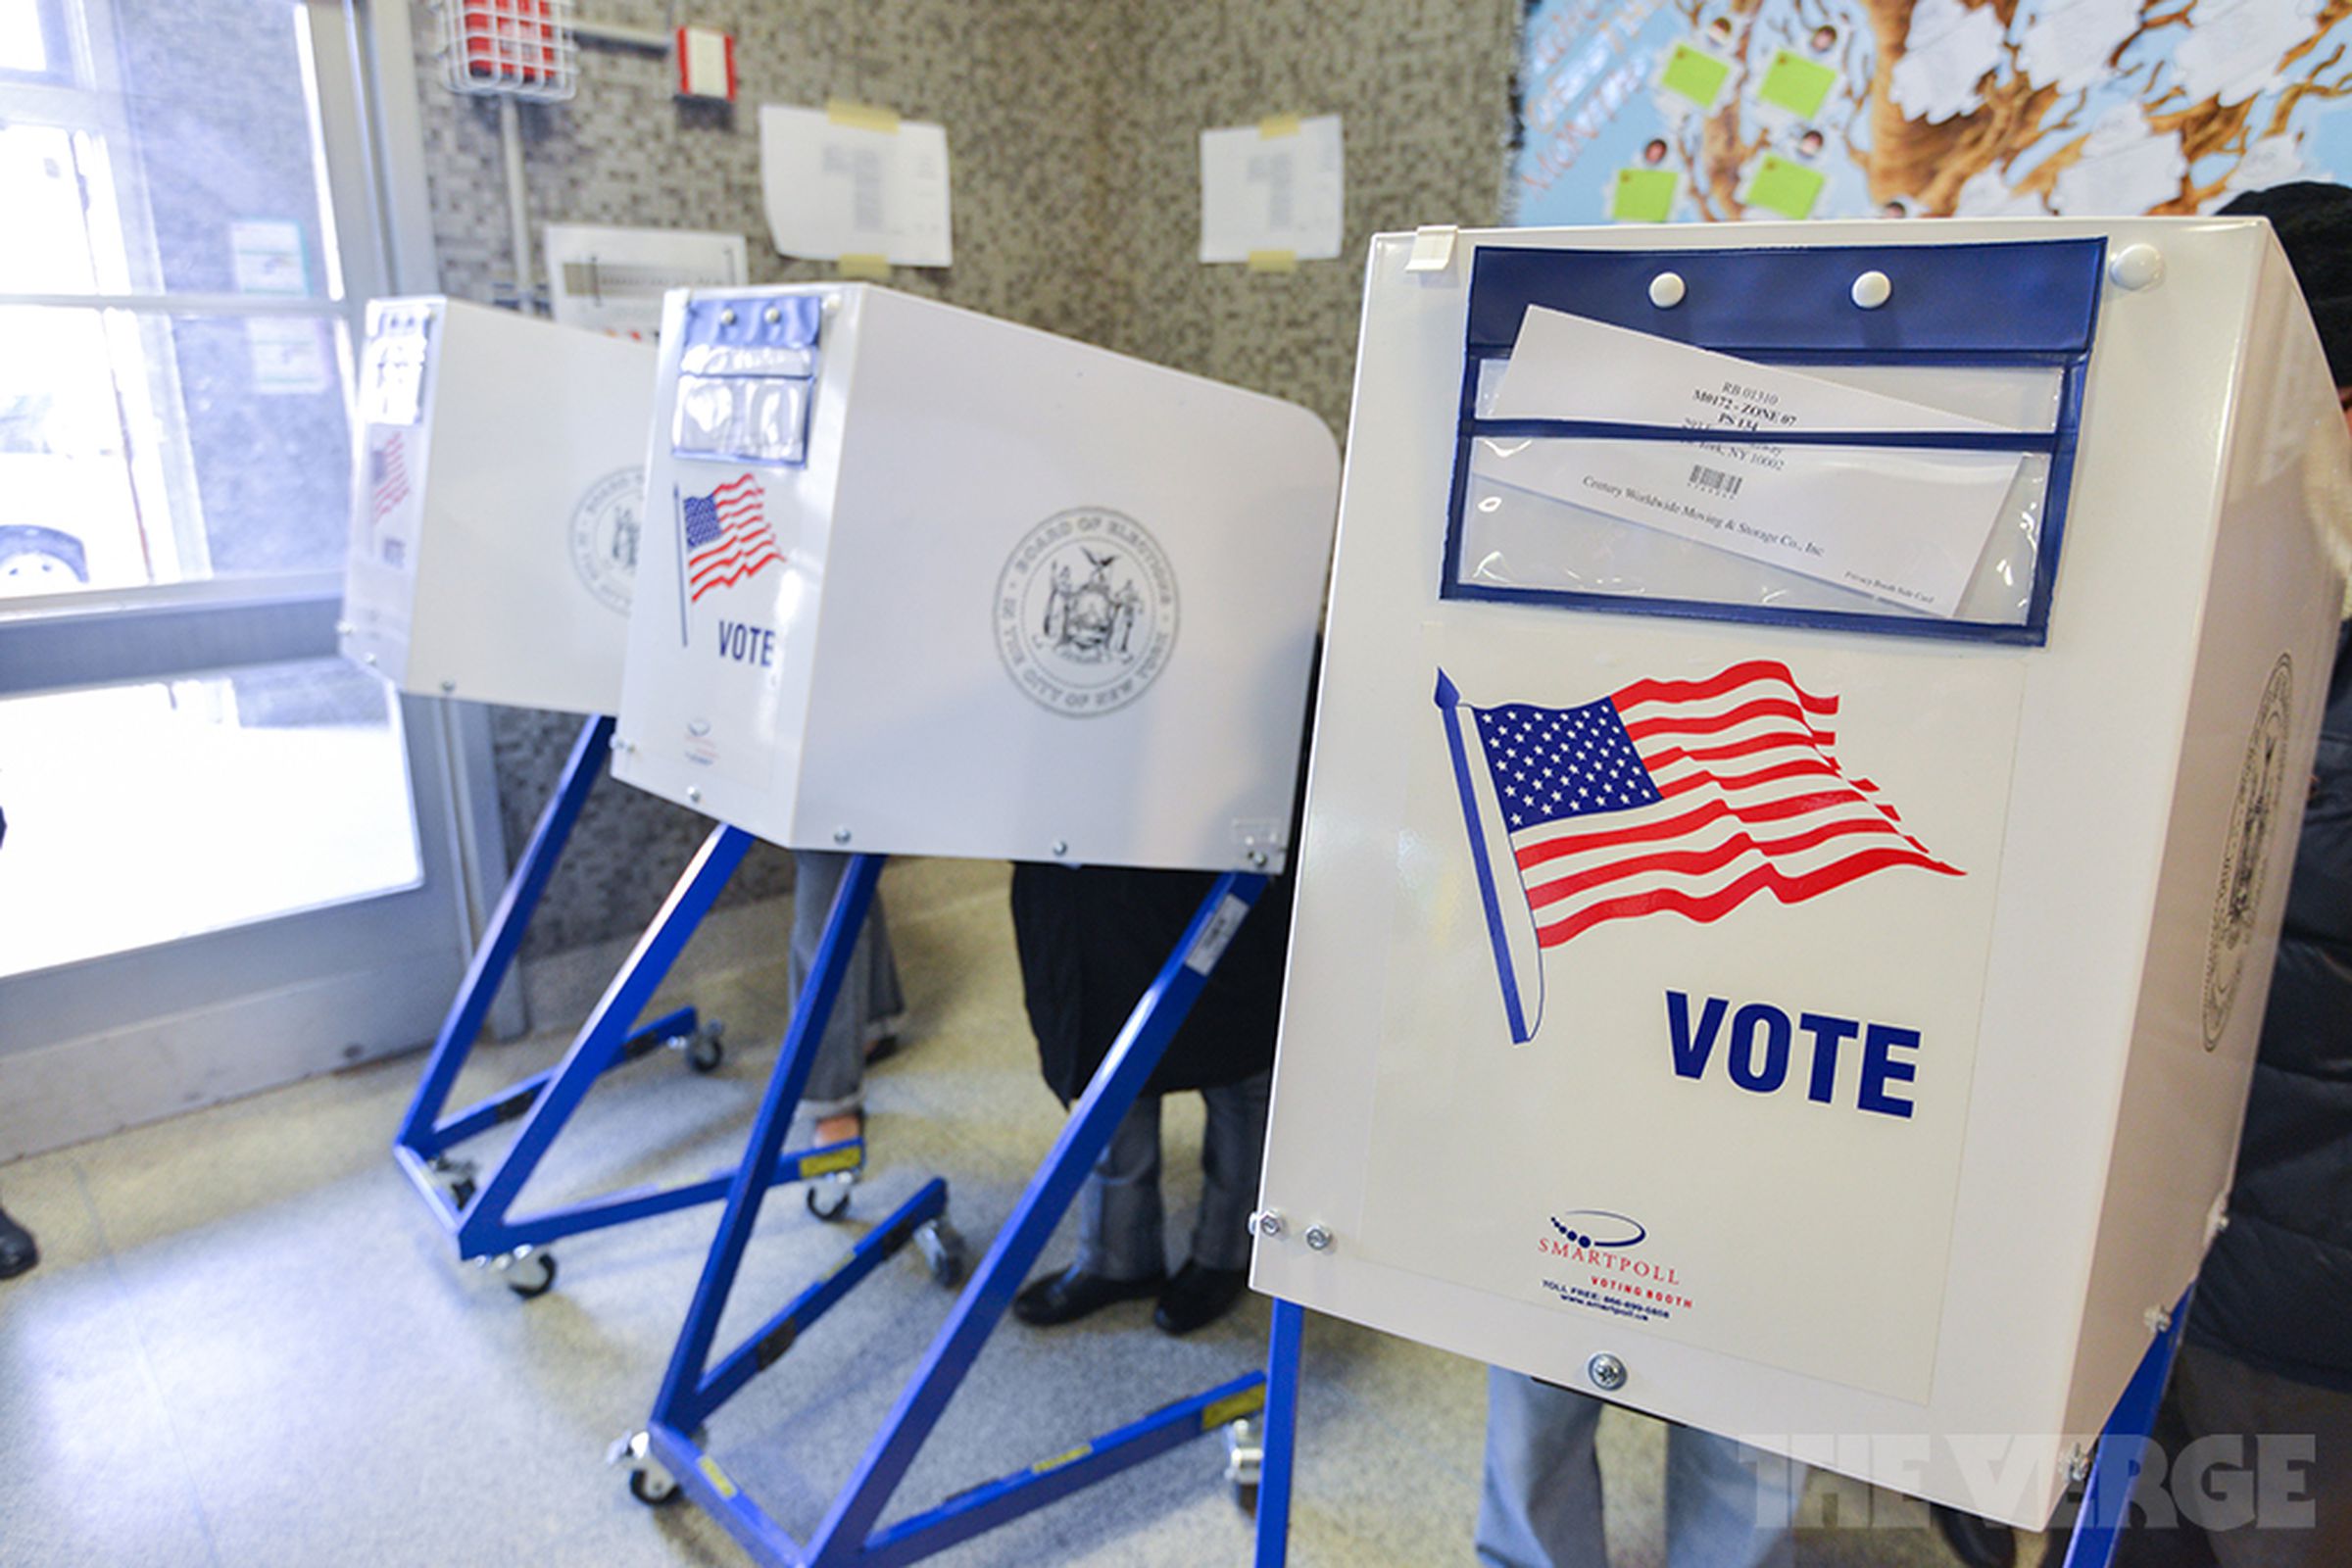 Voter rolls are available to political parties and, in many cases, to the general public.